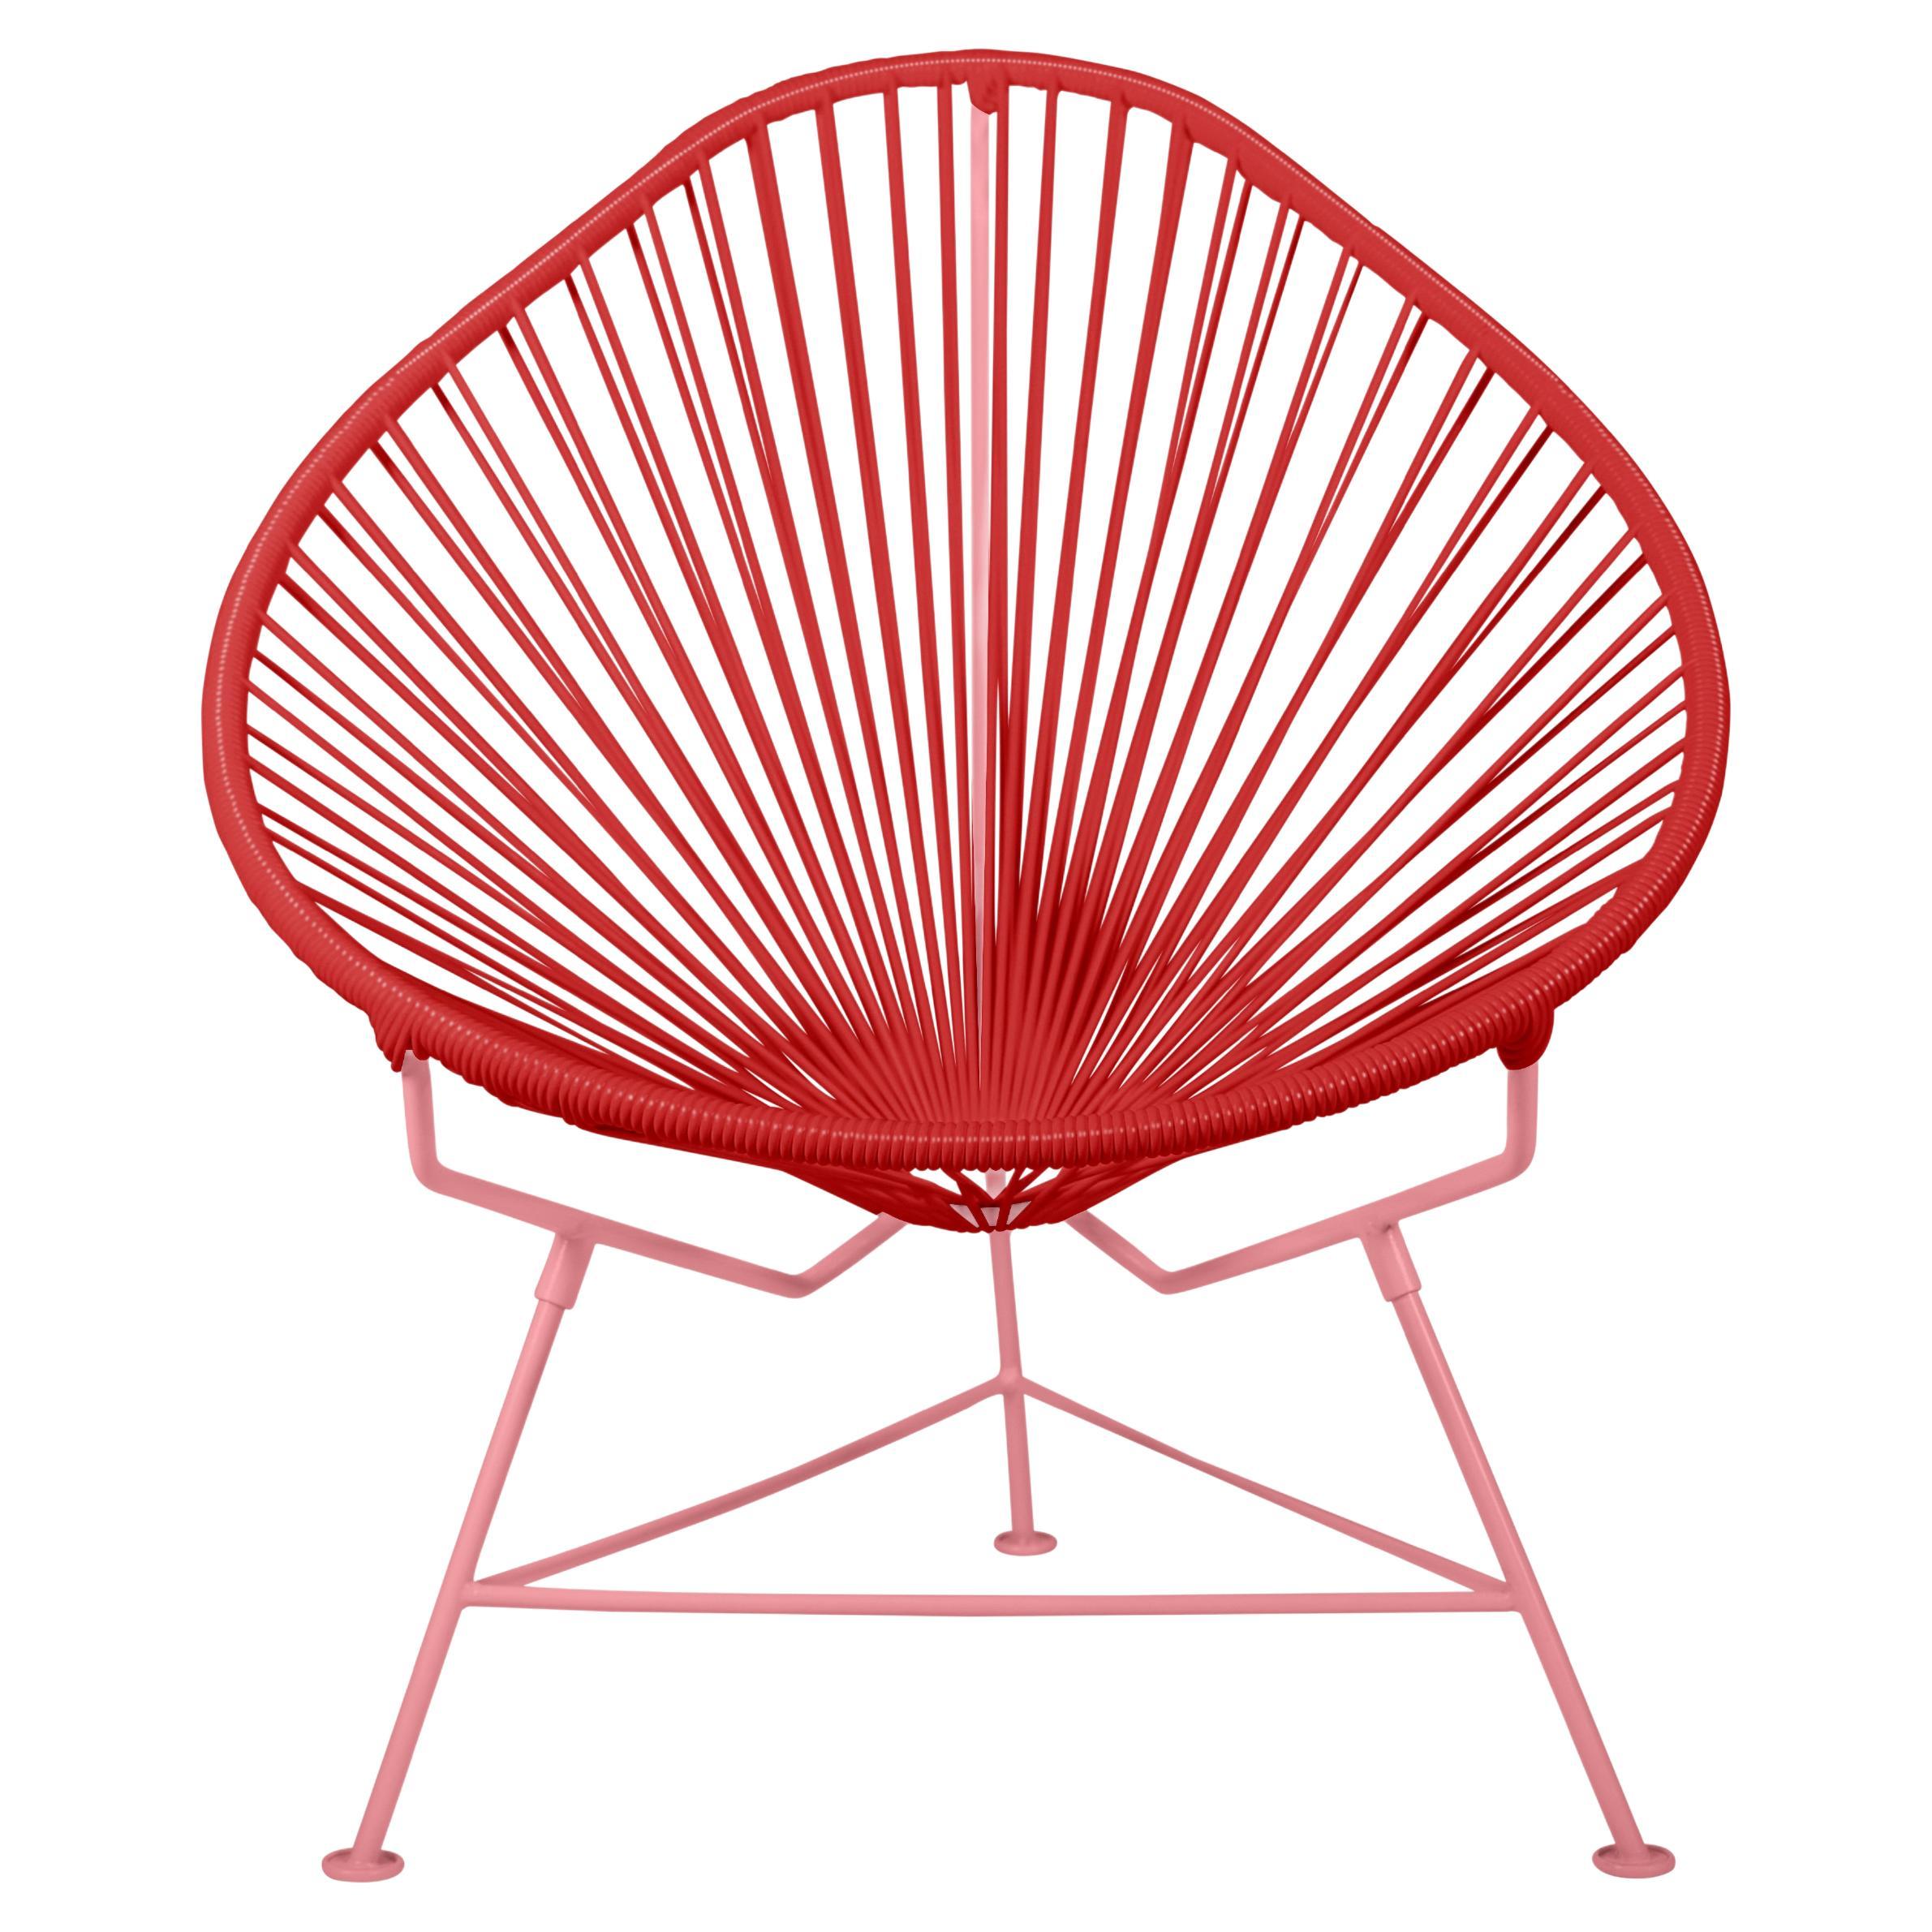 Innit Designs Acapulco Chair Red Weave on Coral Frame For Sale